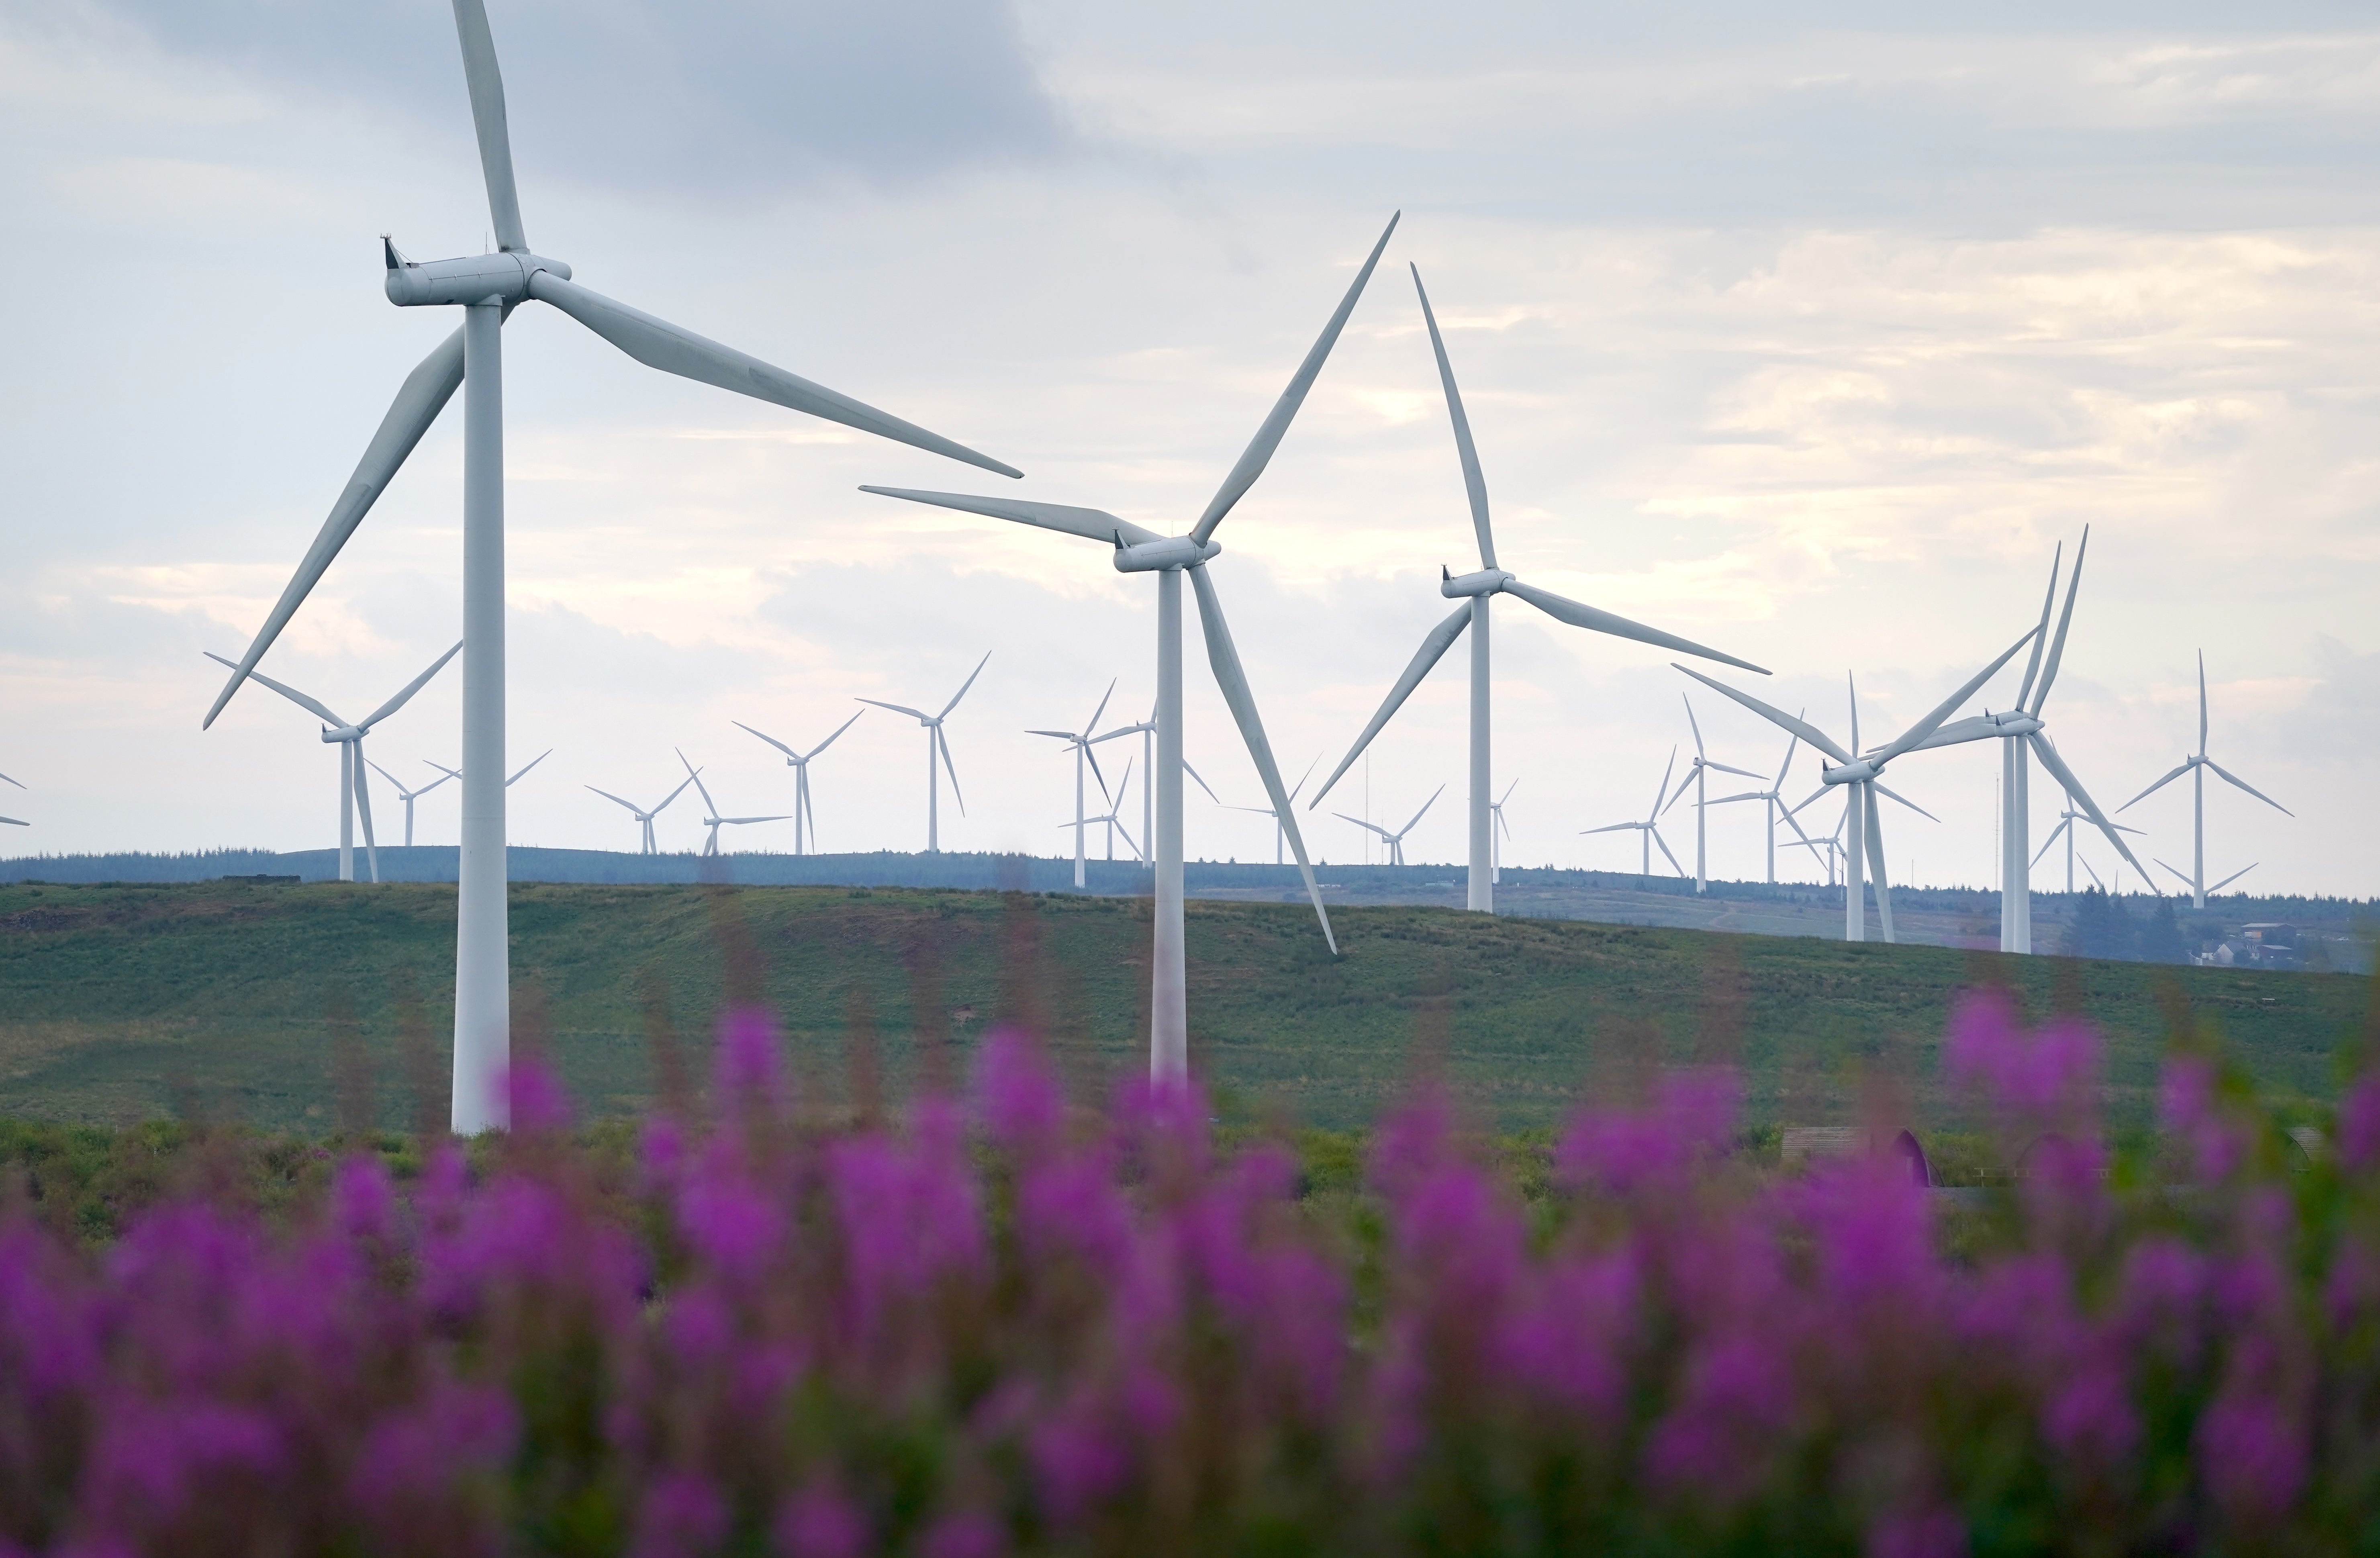 Wind power production has soared in the past decade